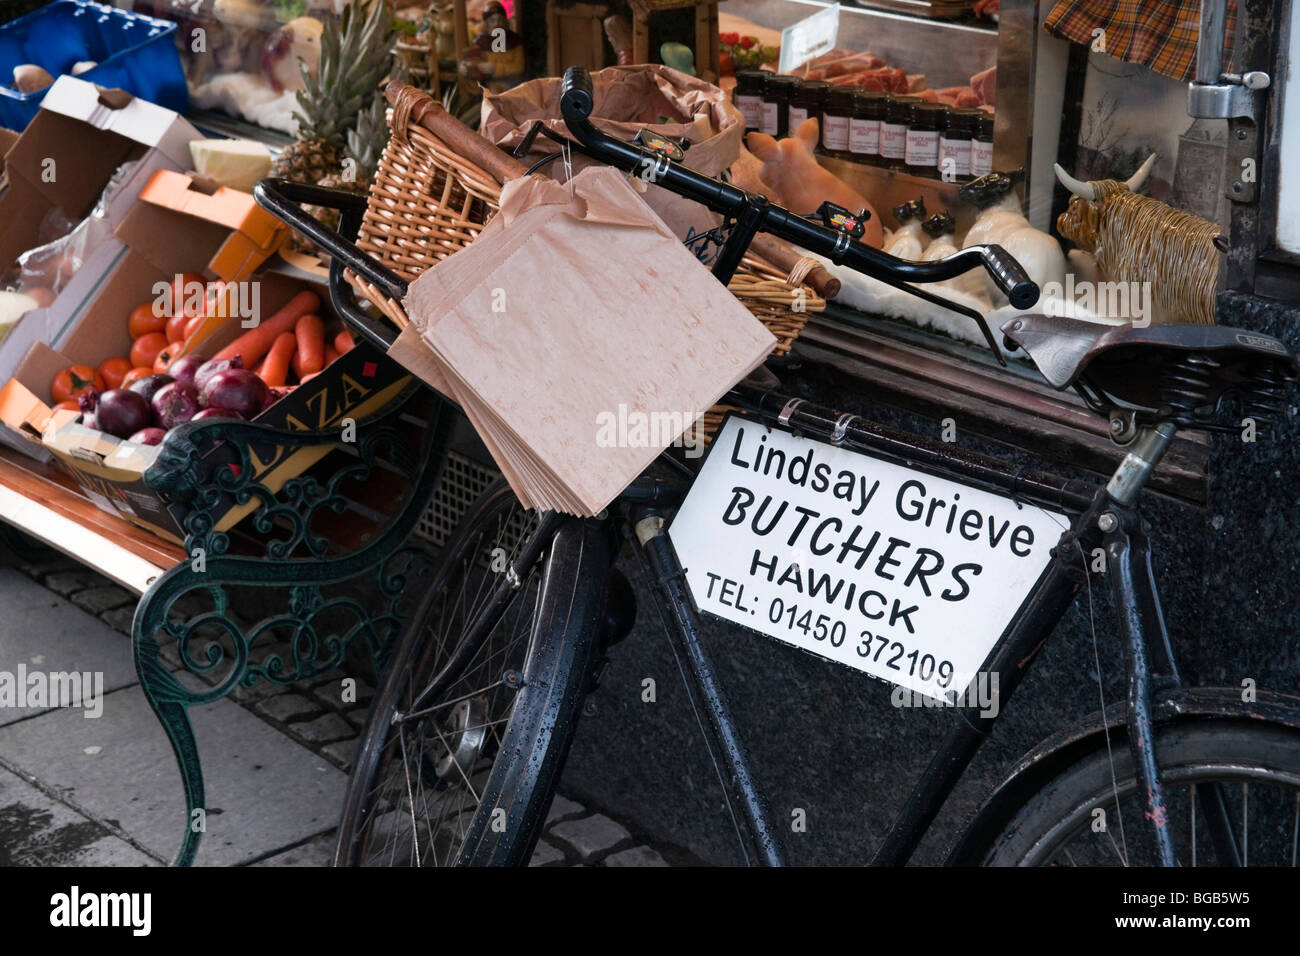 Traditional delivery bicycle for butchers and grocers shop Lindsay Grieve of Hawick in Scotland Stock Photo